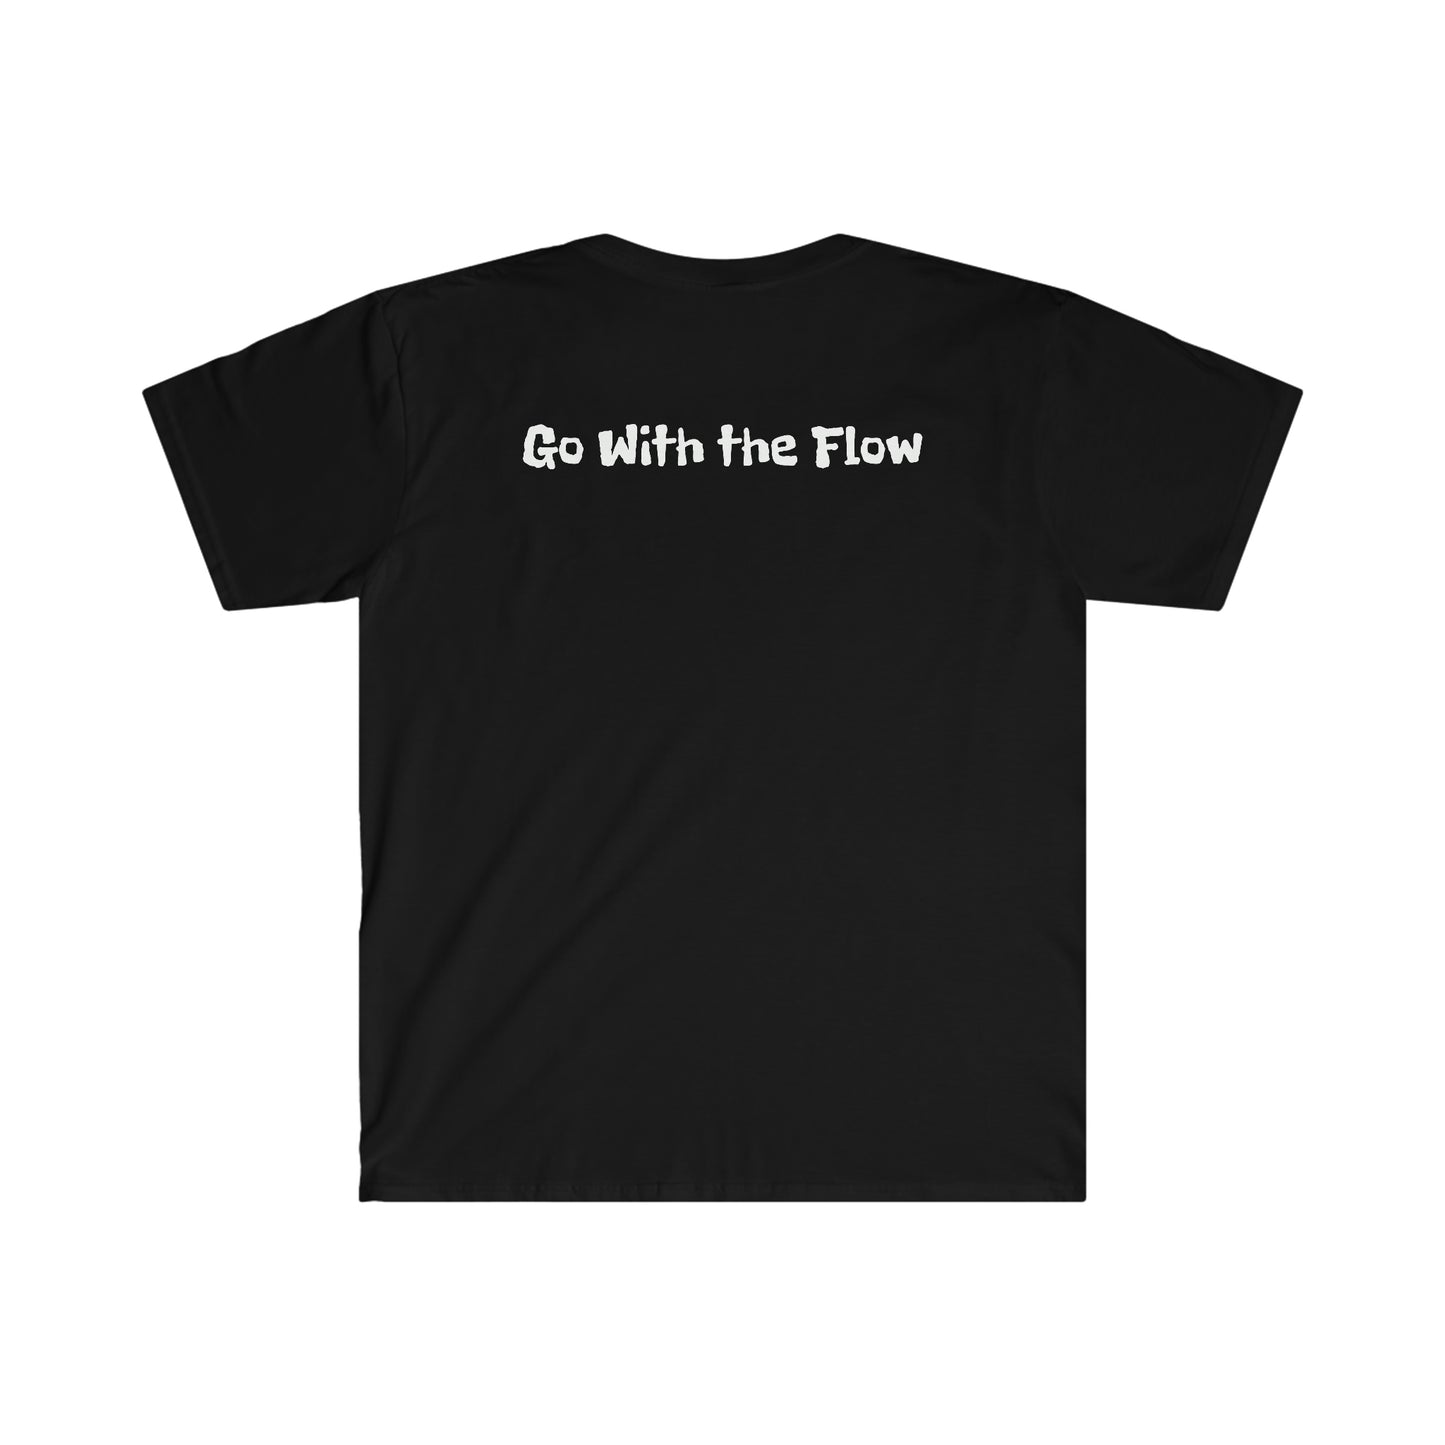 Berg T Time Adventures Go With The Flow T-Shirt. It's all black, it's all you need!